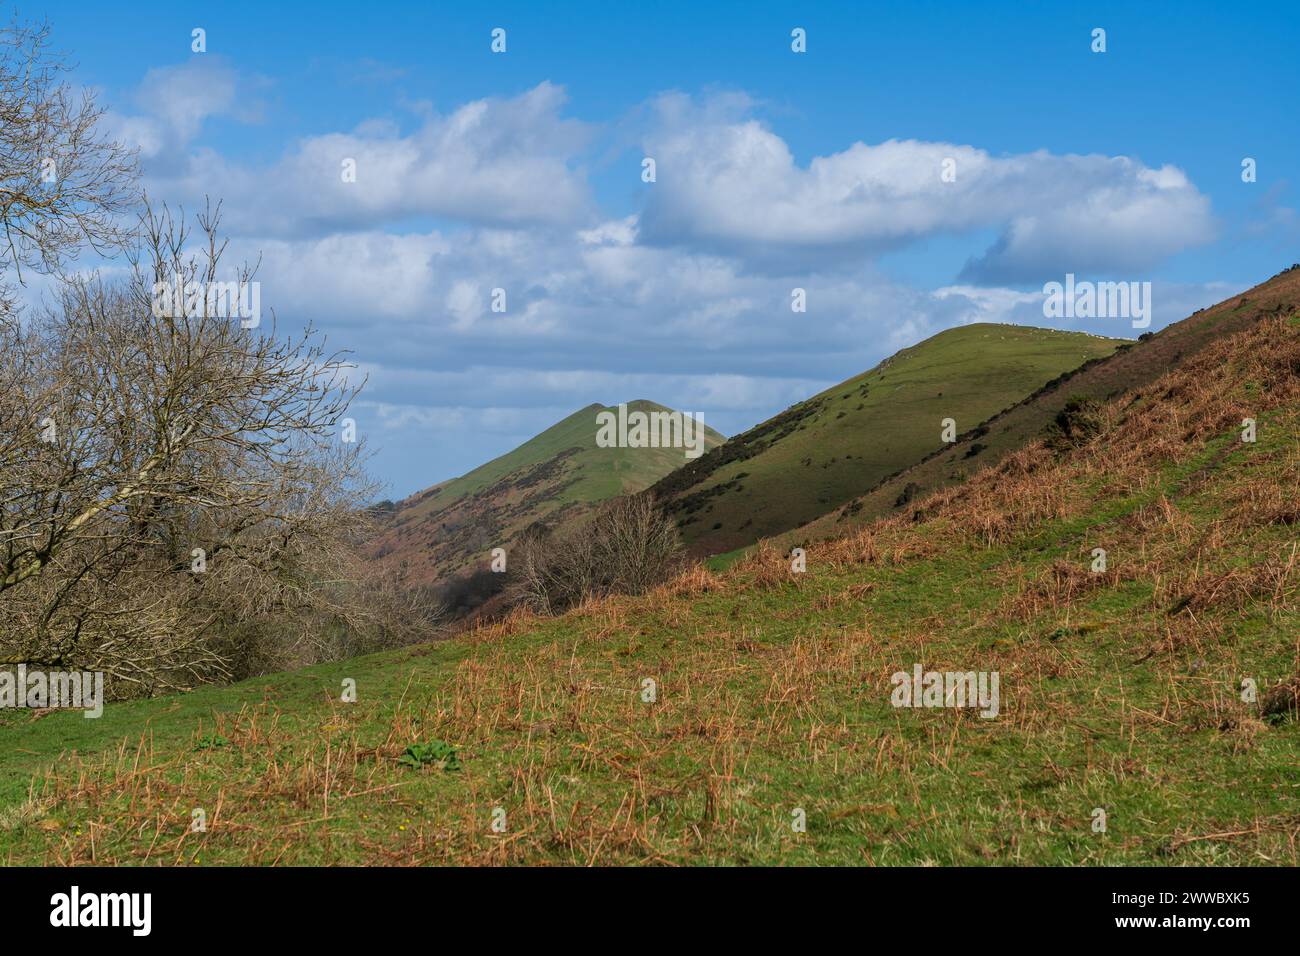 Shropshire, UK landscape image of the Shropshire hills on a pleasant Spring day Stock Photo